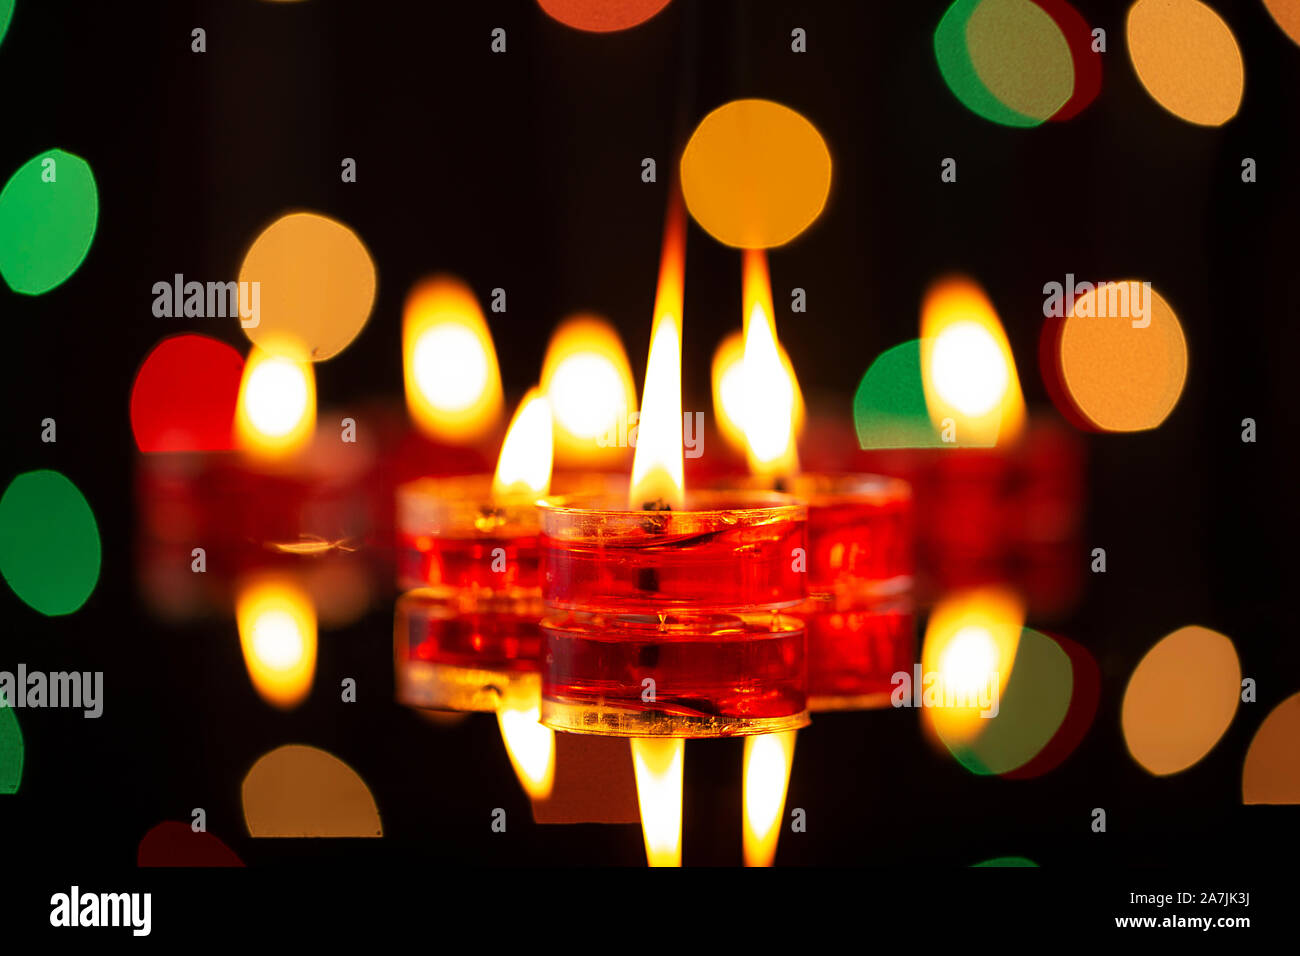 Festival of Lights candlelight. focus on foreground of many burning tealight candles Stock Photo